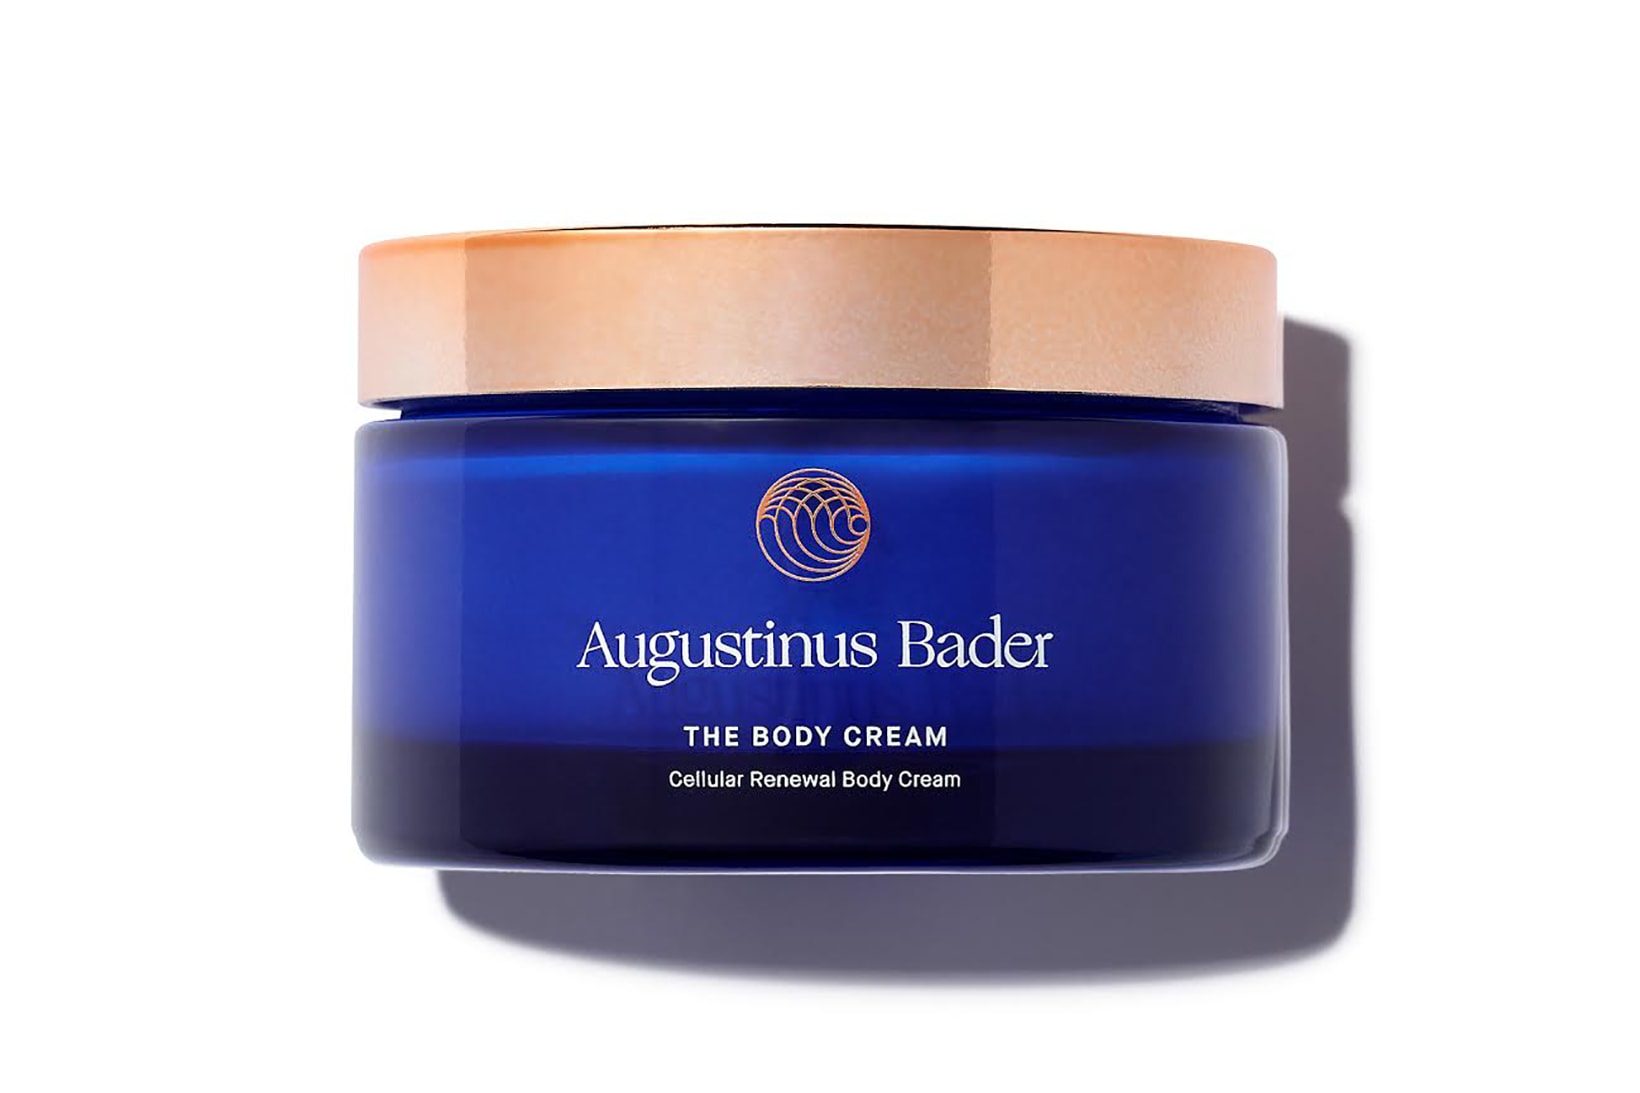 augustinus bader the body cream violet grey body care skincare tfc8 beauty products cruelty free natural ingredients brazilian candeia oil shea butter